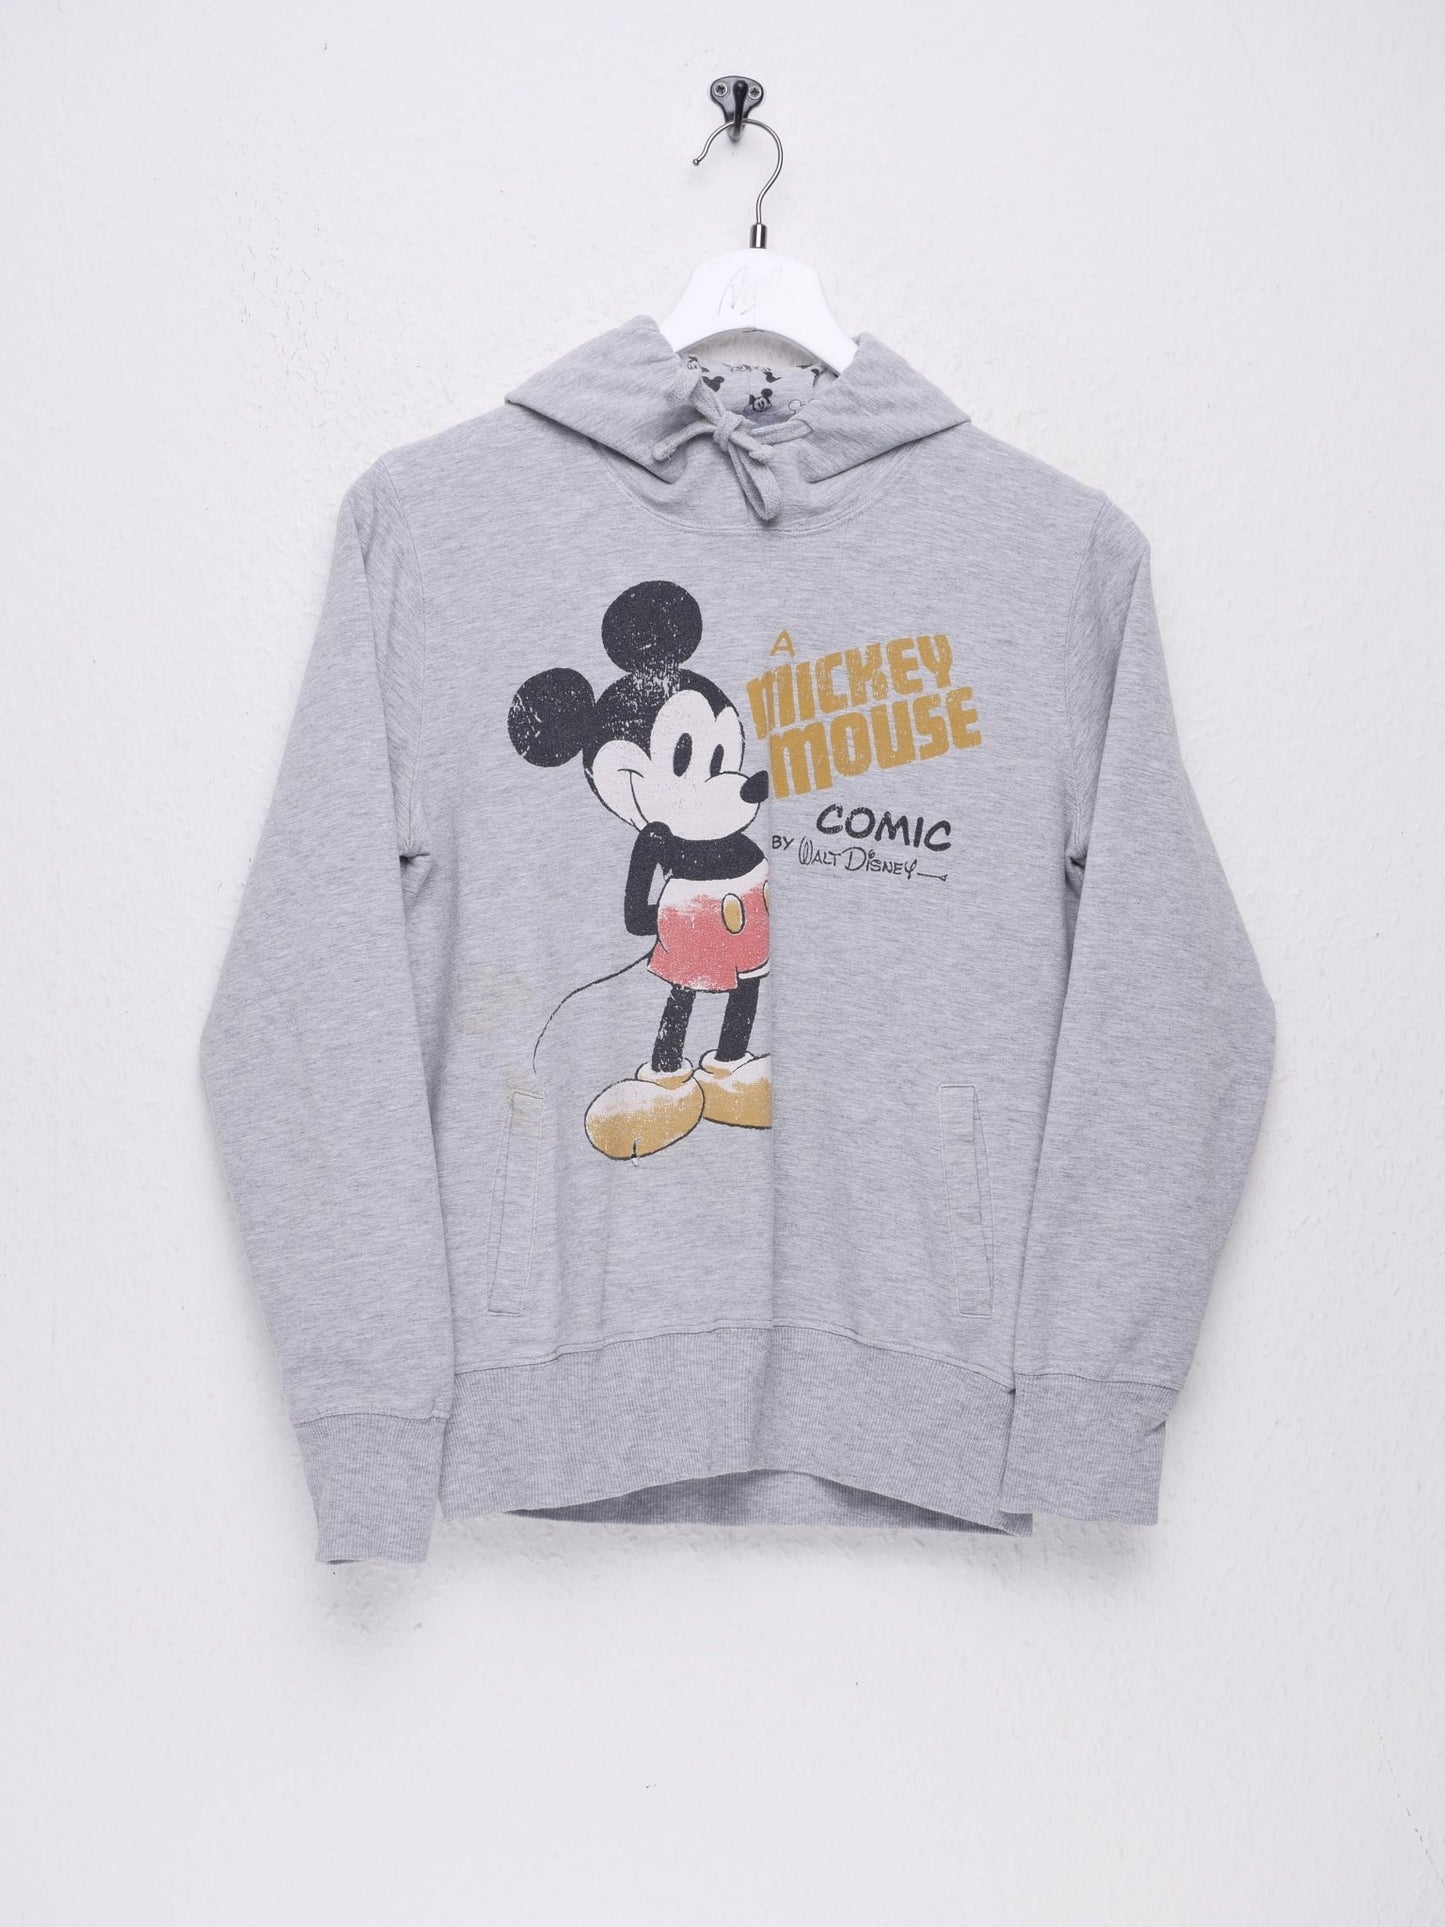 Disney 'Mickey Mouse' printed Graphic grey Hoodie - Peeces